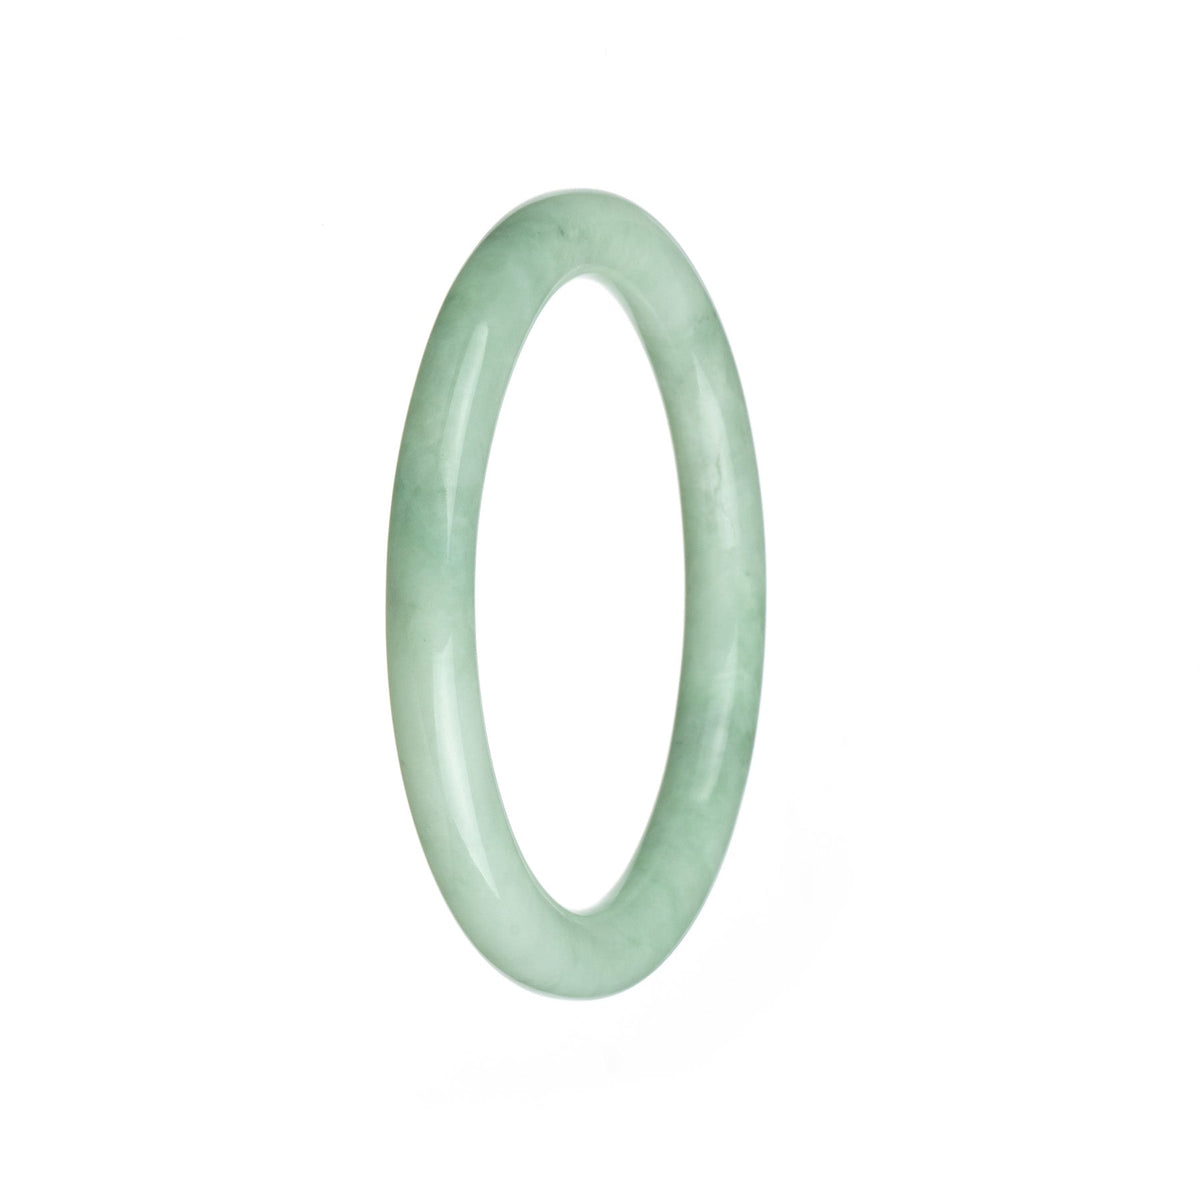 A light green jadeite jade bracelet with a petite round design, measuring 59mm in size.